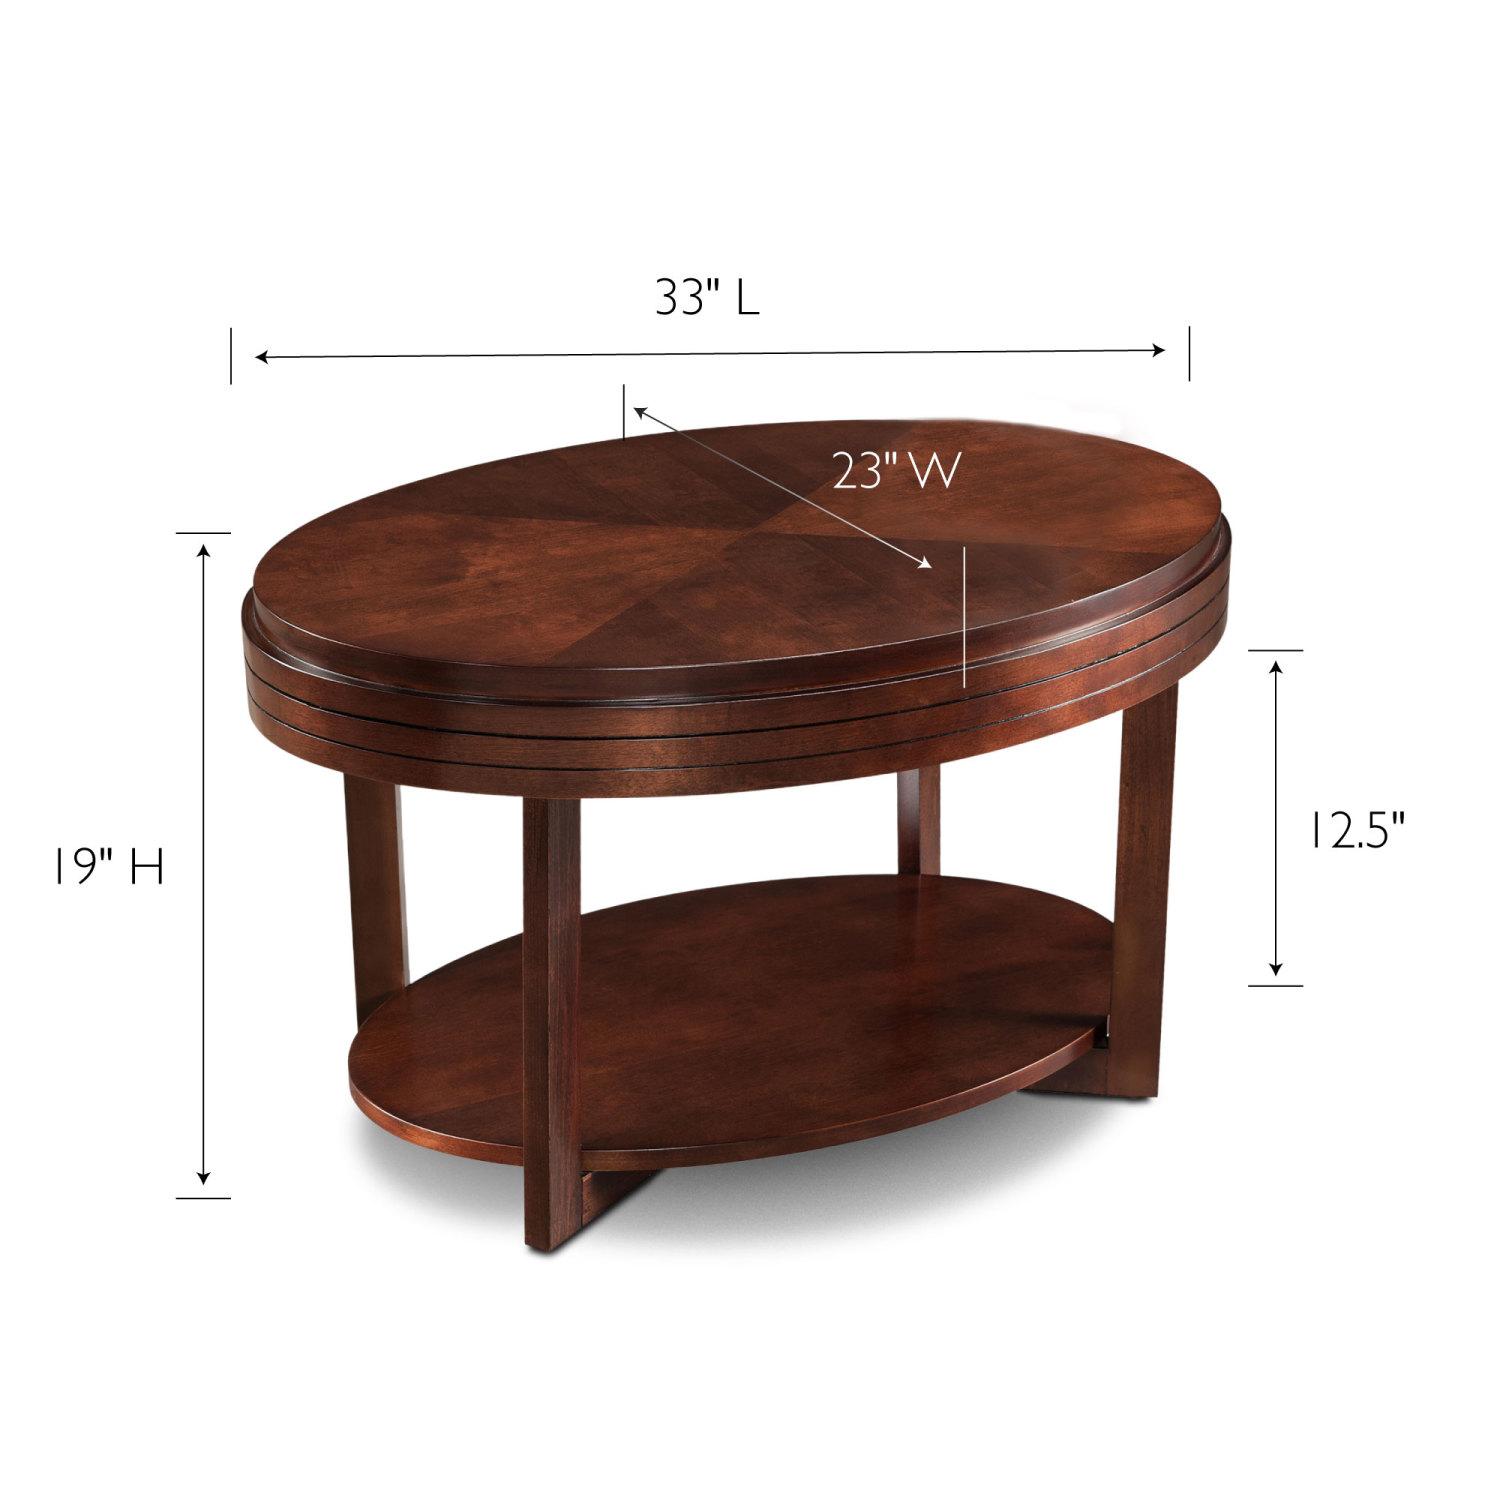 Leick Home, Leick Home 10109-CH Favorite Finds Oval Apartment Coffee Table in Chocolate Cherry New